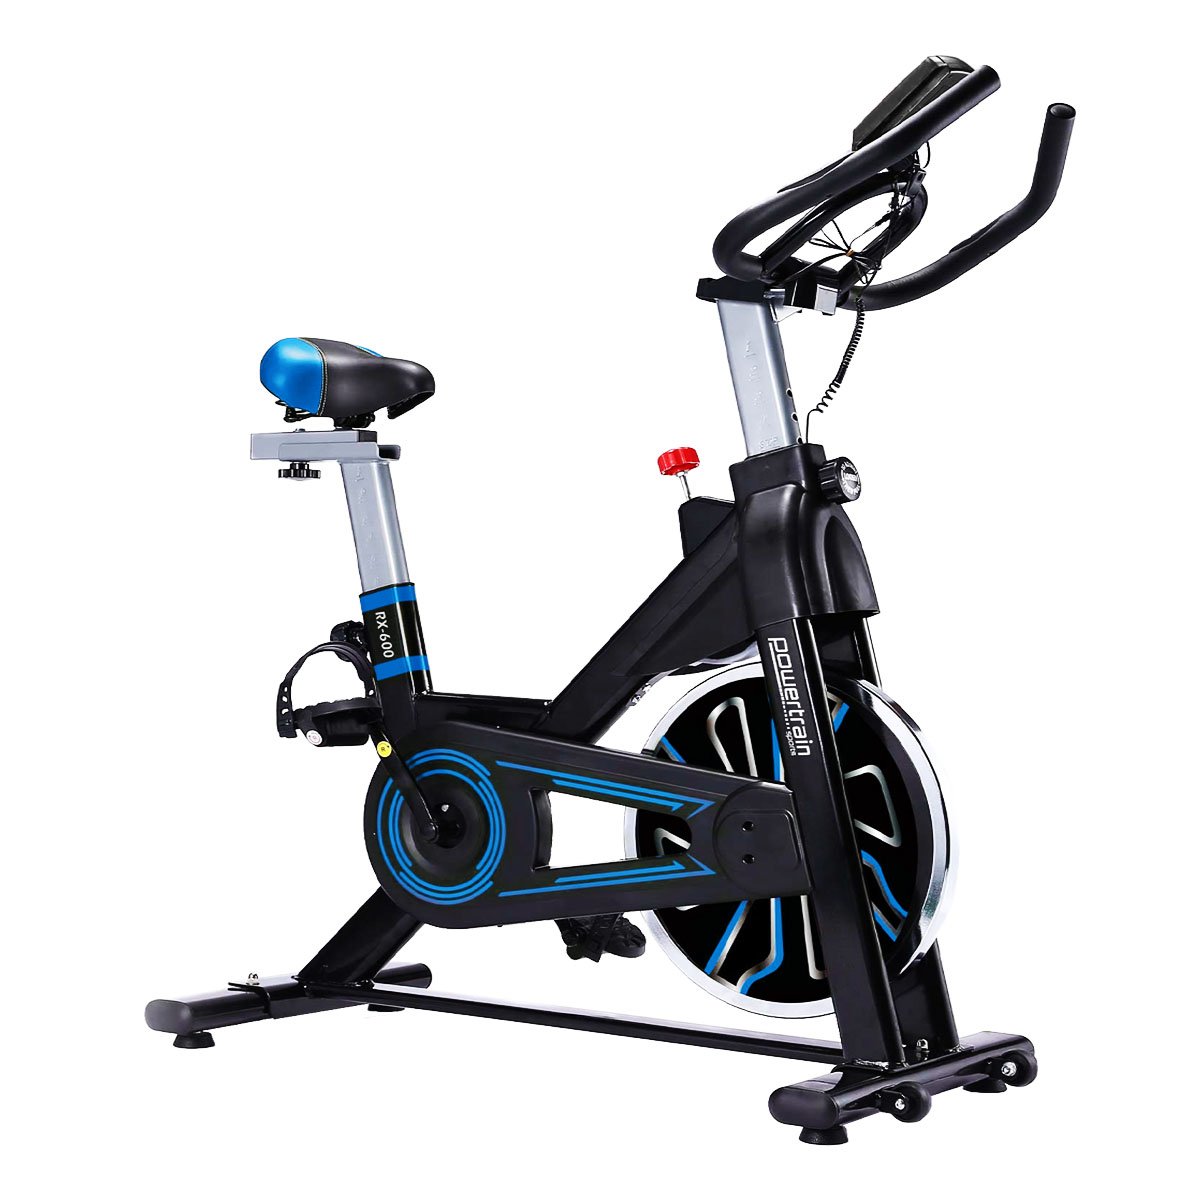 PowerTrain RX-600 Exercise Spin Bike Cardio Cycle - Blue 1